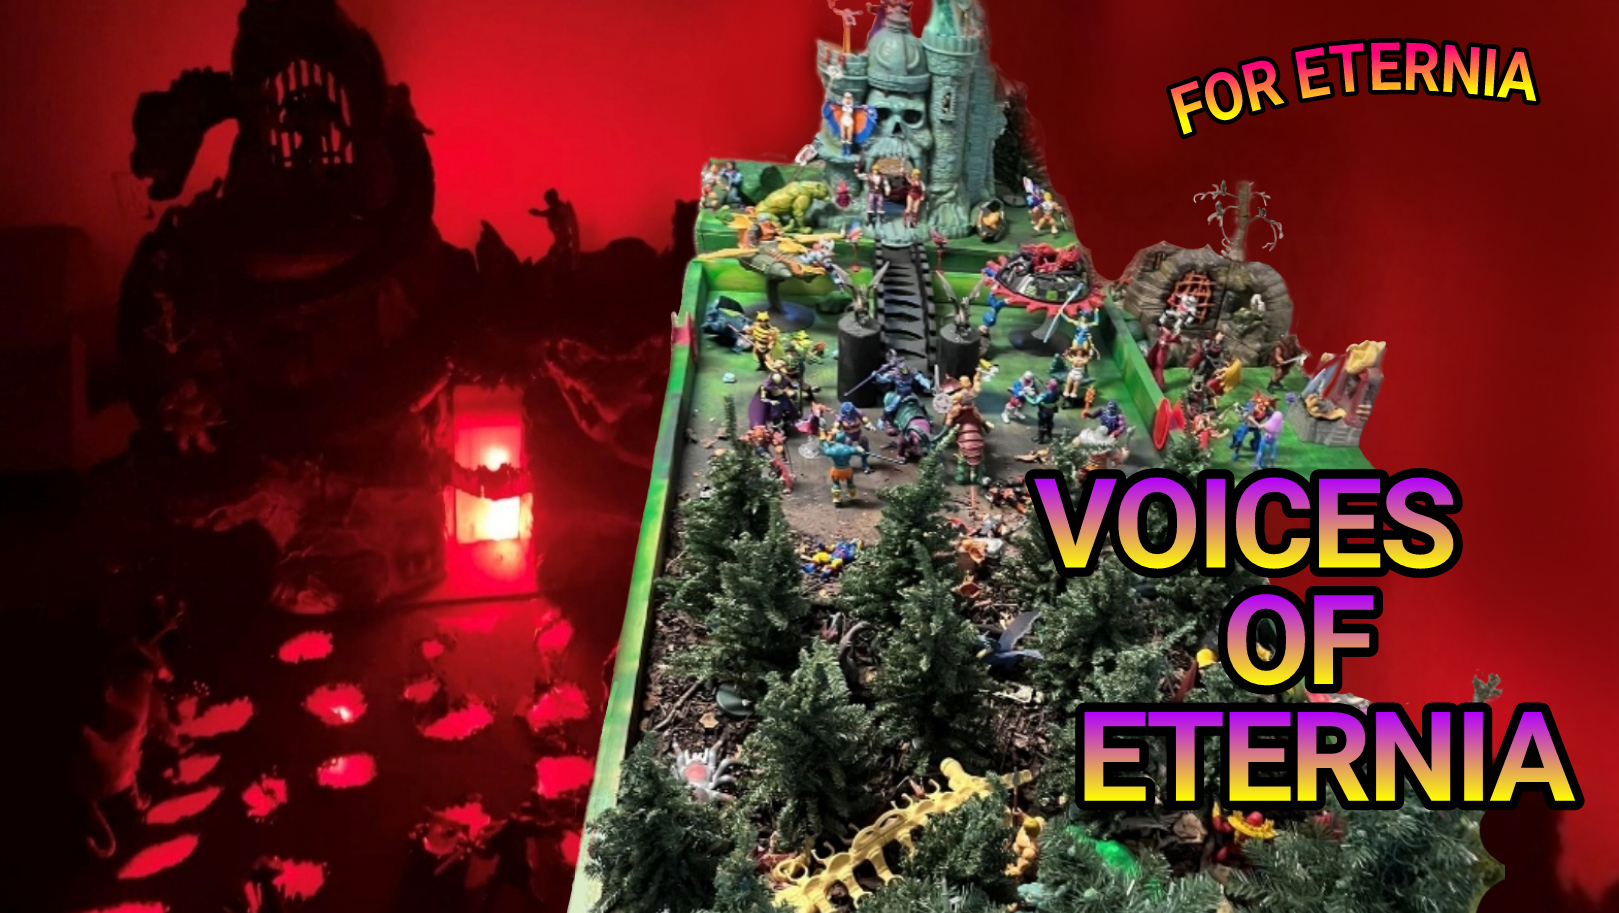 VOICES OF ETERNIA: My Dioramas – Building the World of Eternia